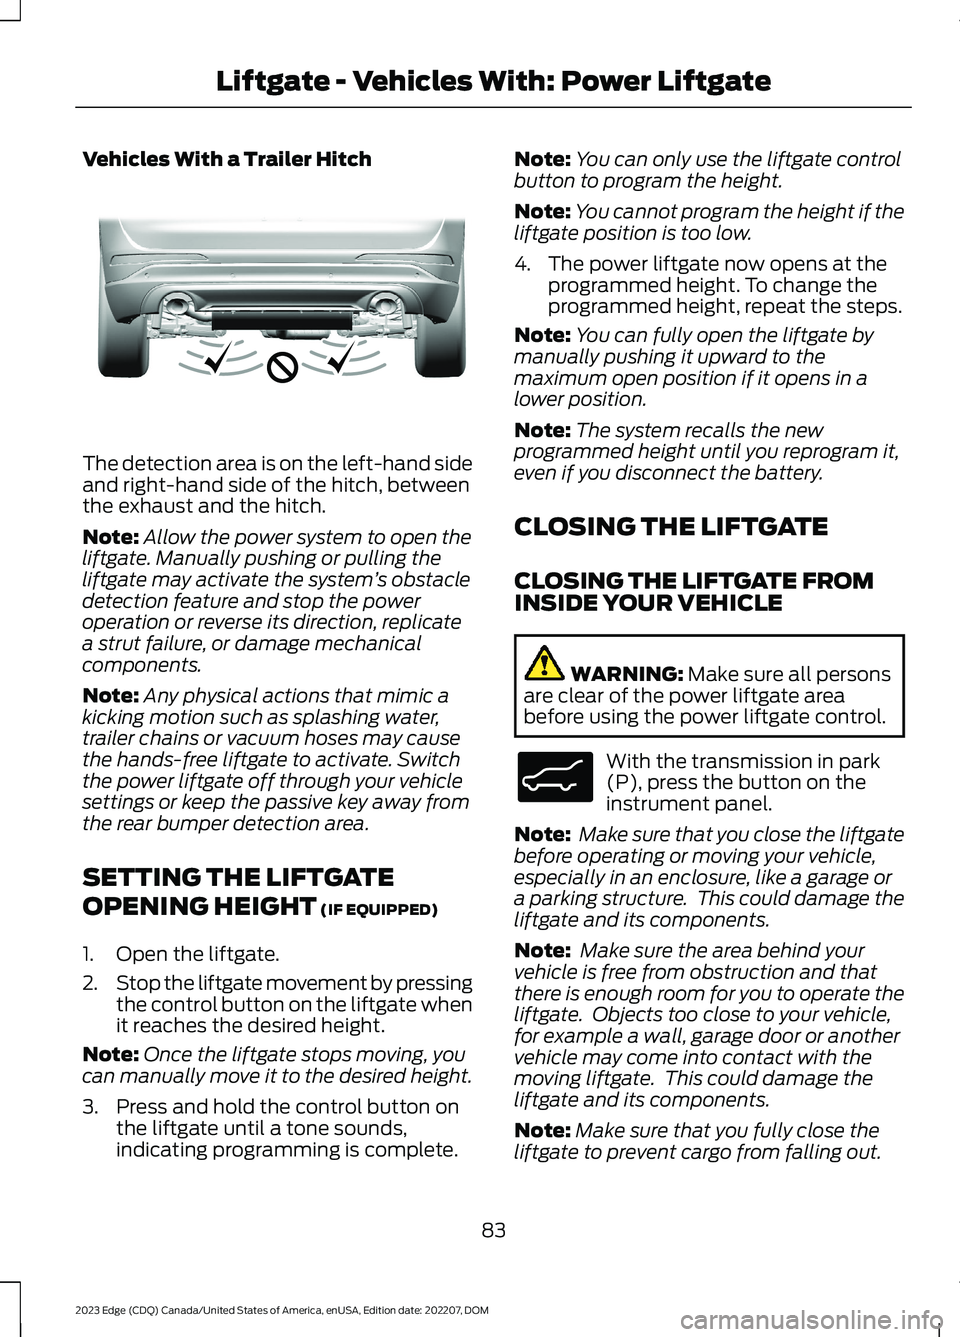 FORD EDGE 2023  Owners Manual Vehicles With a Trailer Hitch
The detection area is on the left-hand sideand right-hand side of the hitch, betweenthe exhaust and the hitch.
Note:Allow the power system to open theliftgate. Manually p